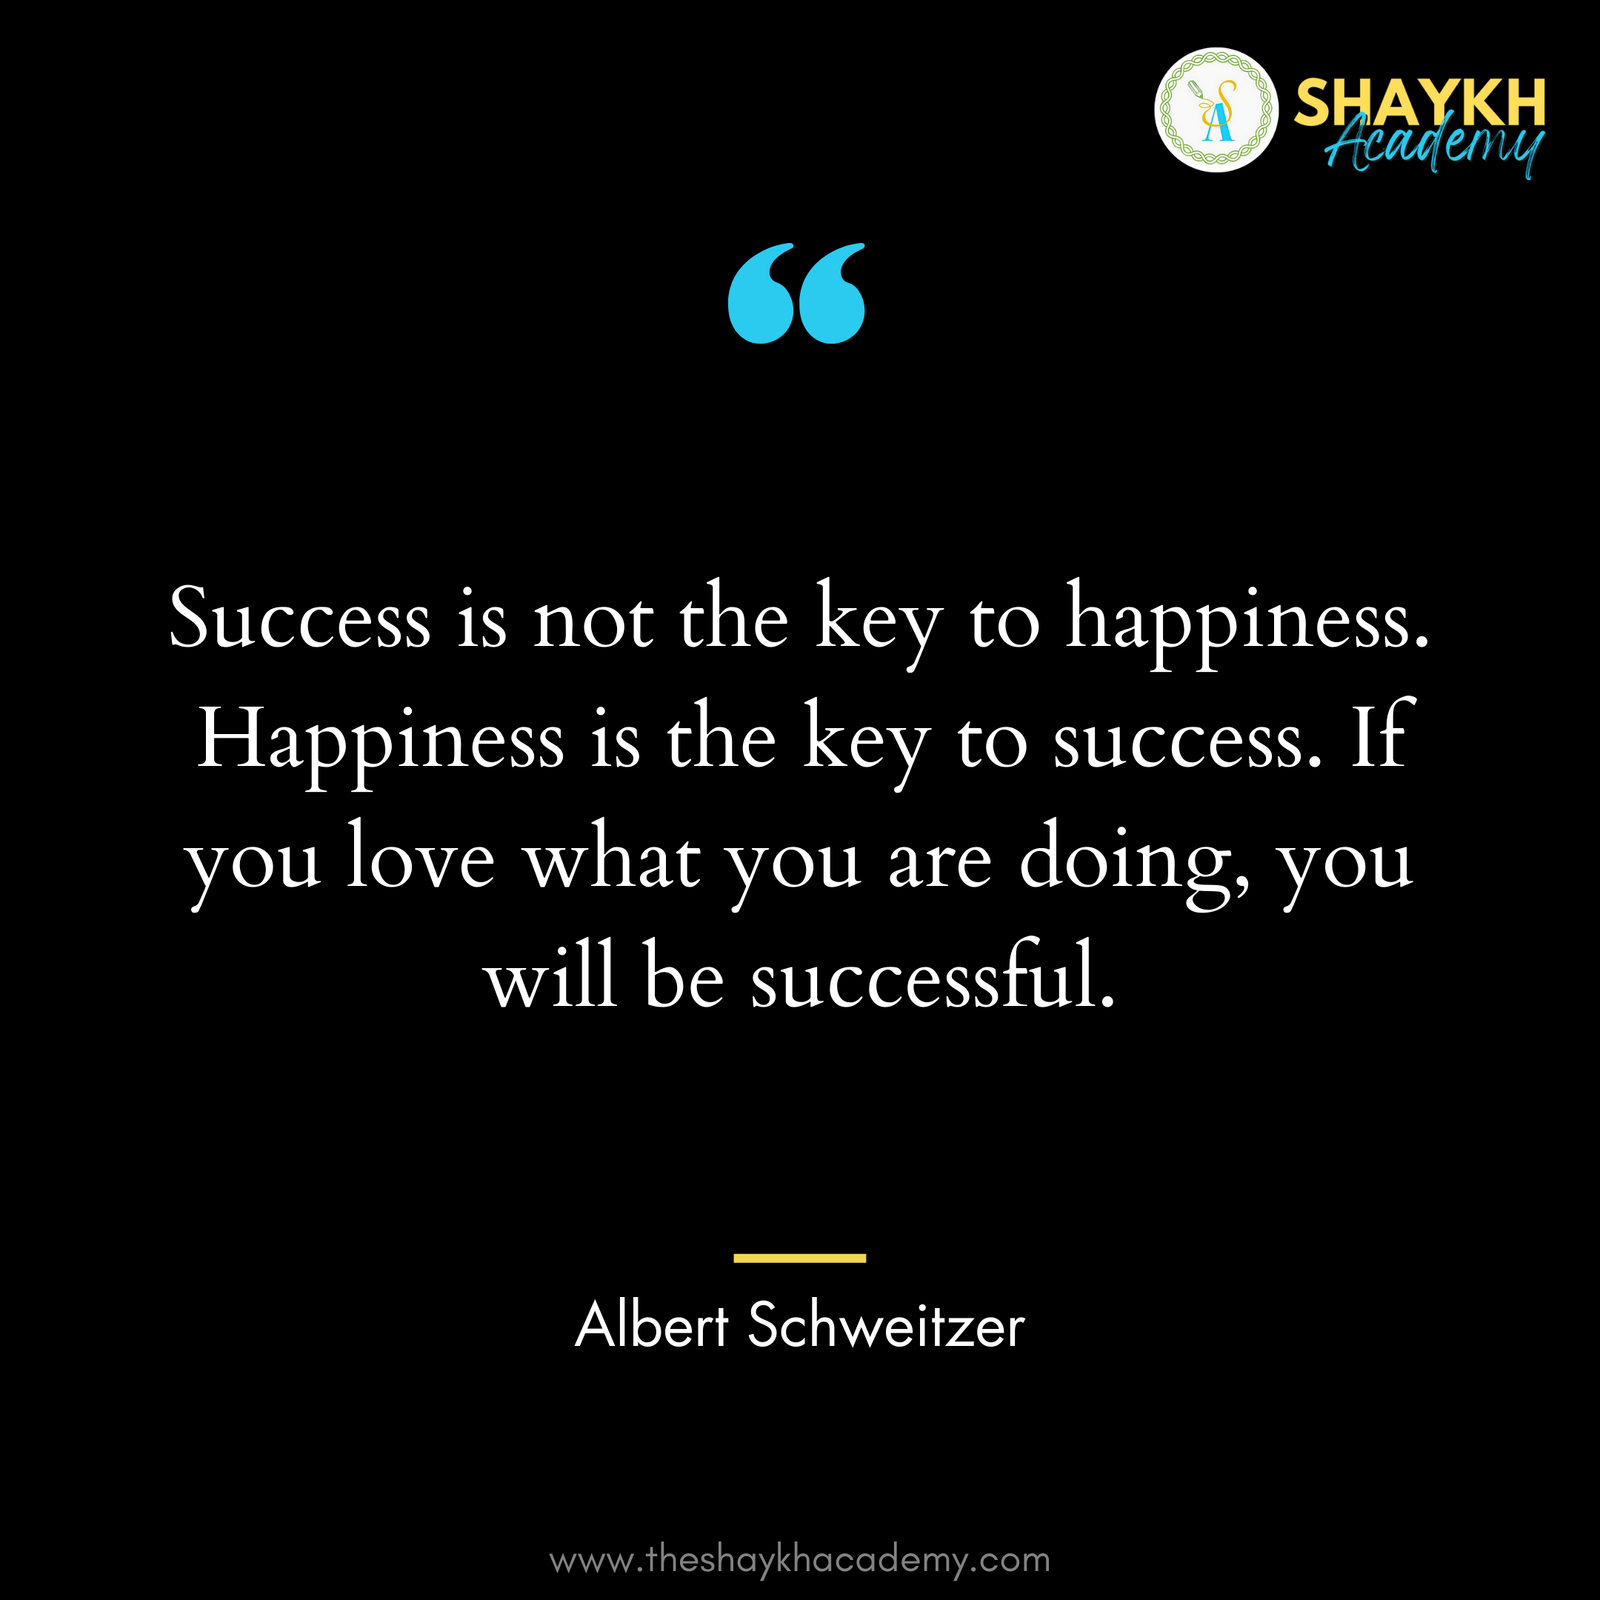 Success is not the key to happiness. Happiness is the key to success. If you love what you are doing, you will be successful